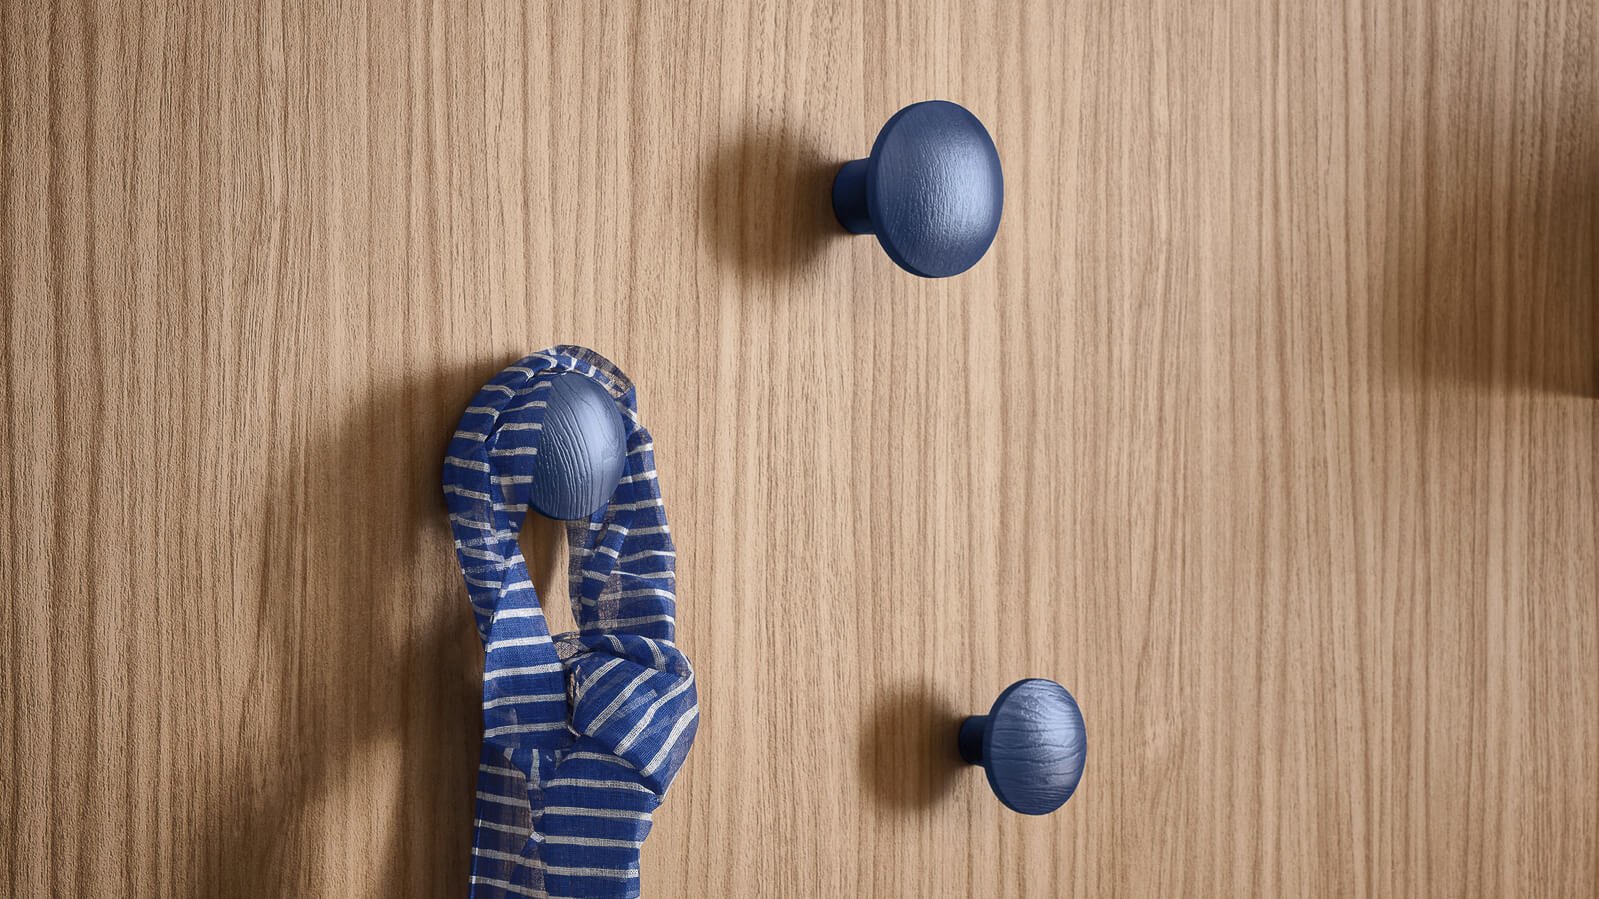 Woody clothes hanger knobs